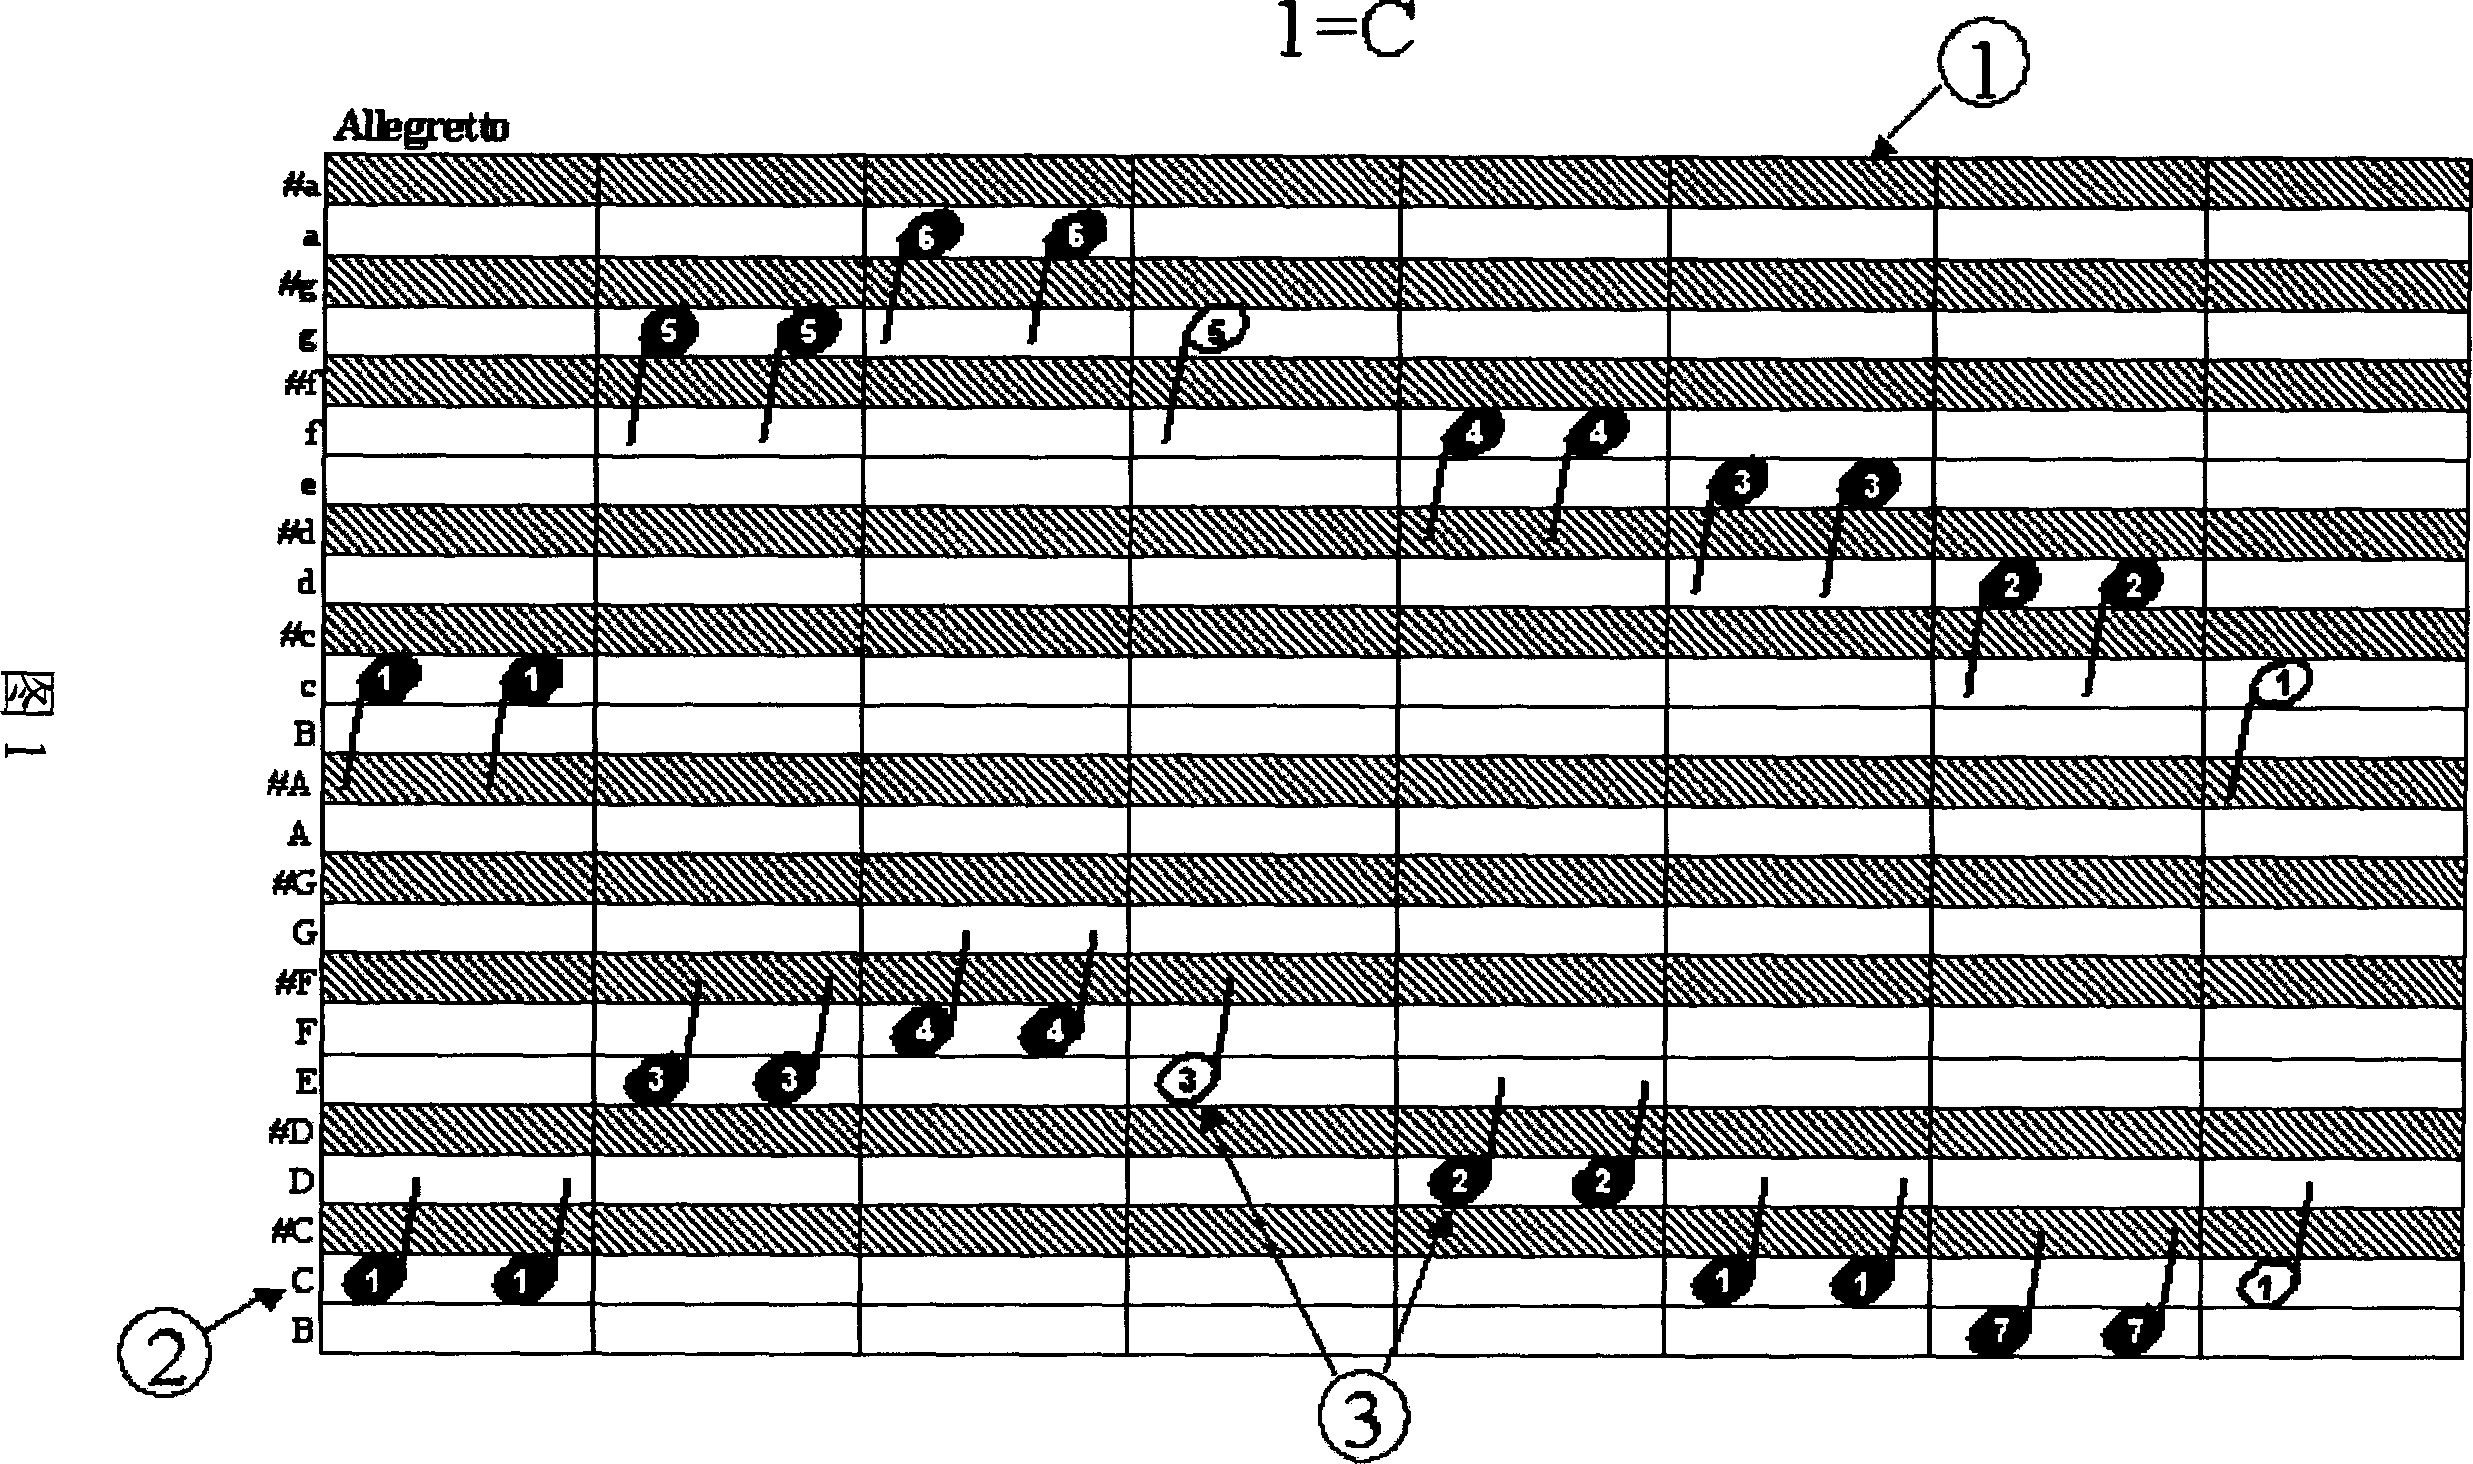 Blank musical notation emerged with staff and numbered notation and corresponding to piano keyboard and musical note form